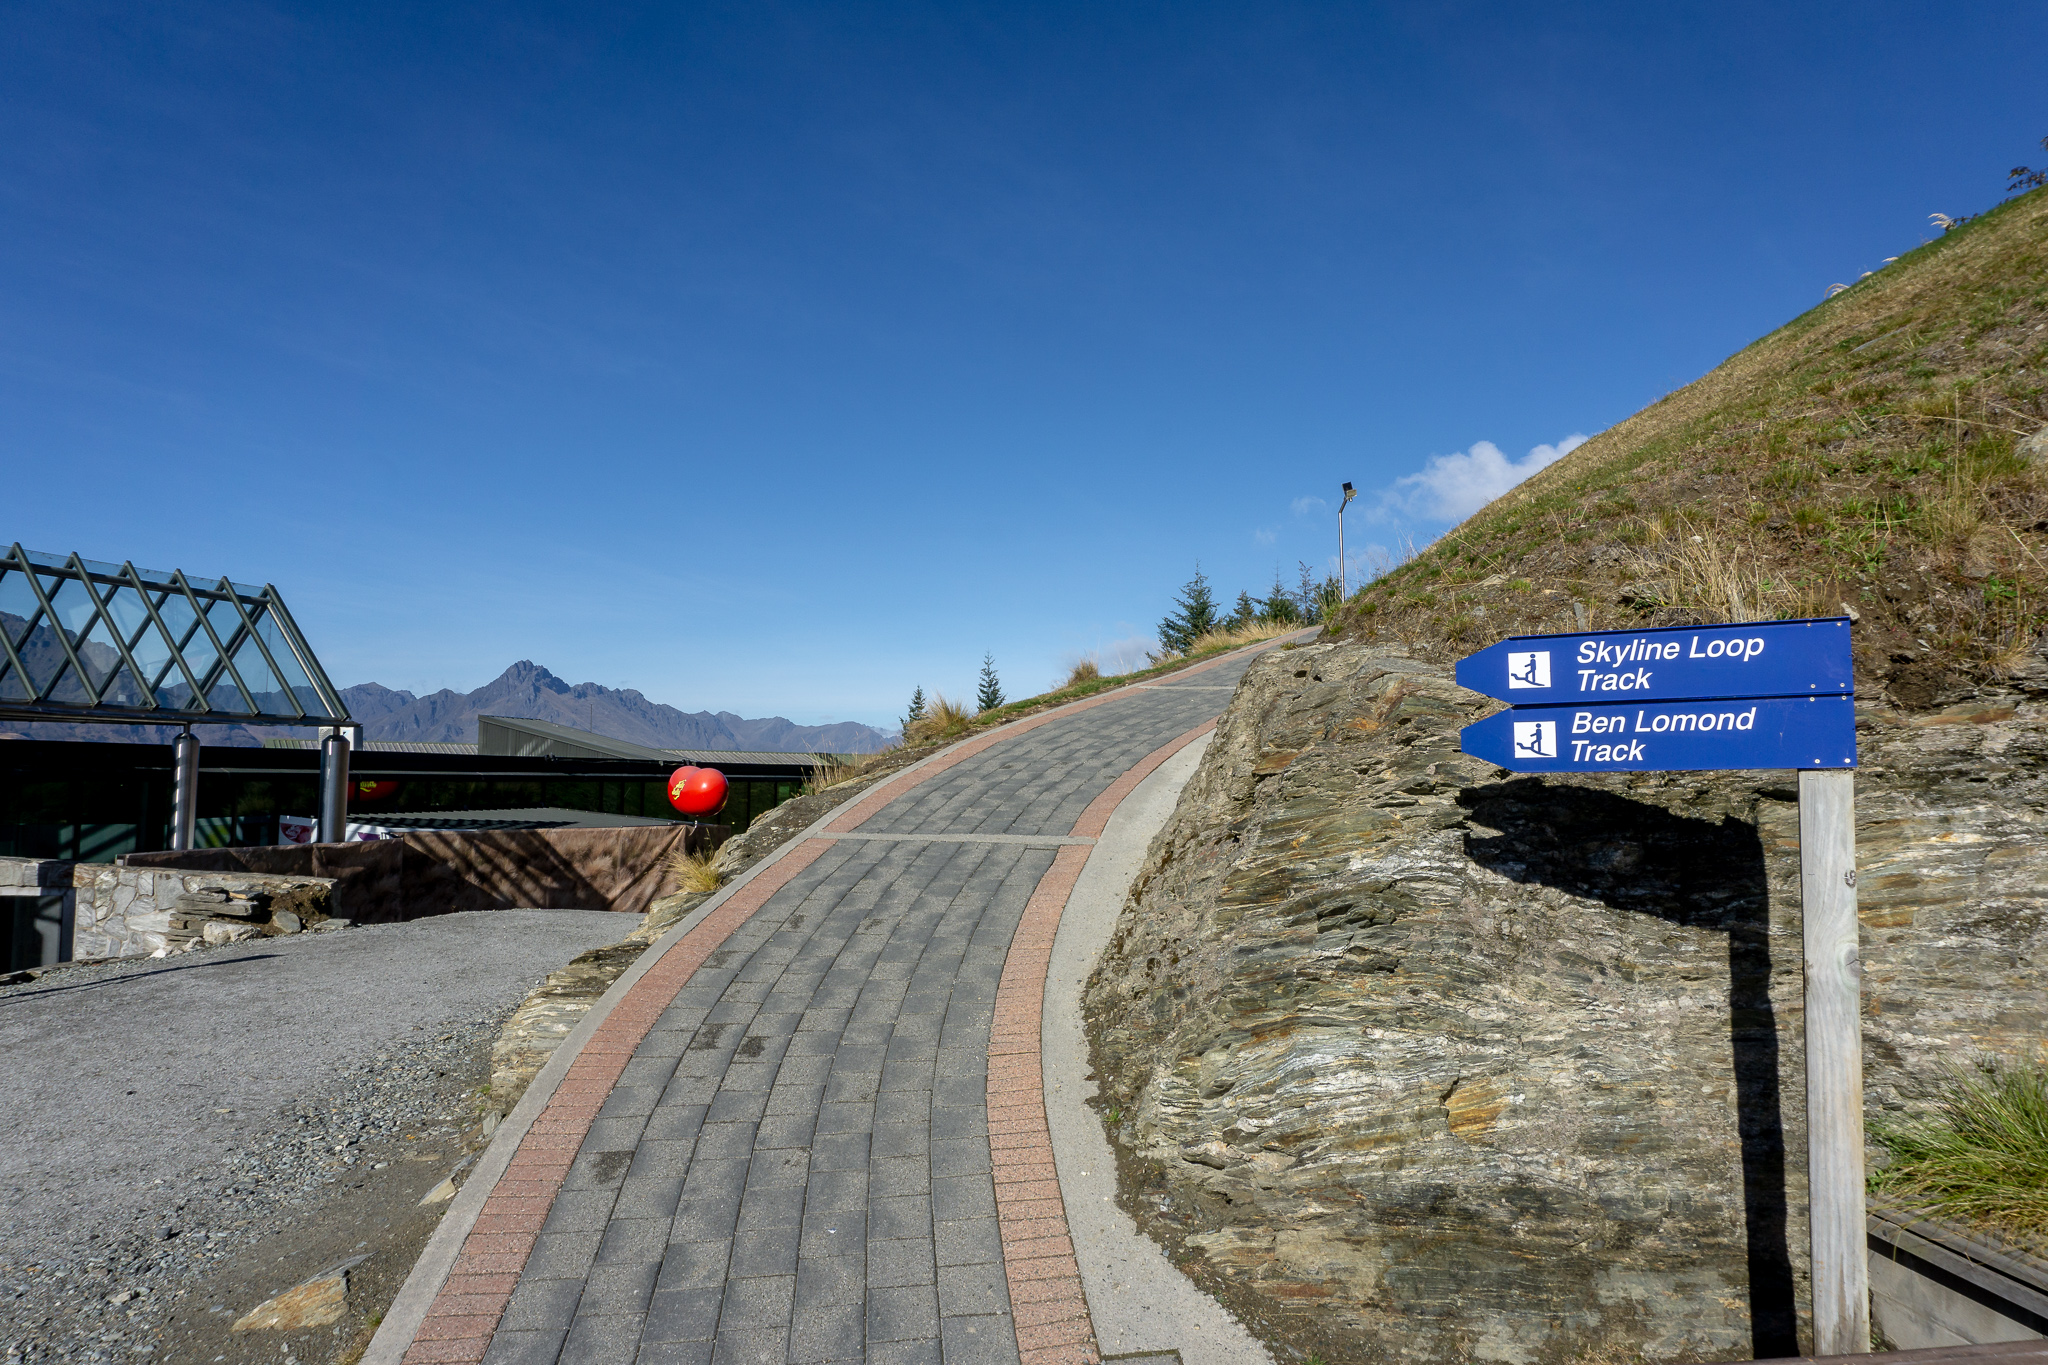 Photo of the start of the Ben Lomond track at the top of the gondola with signage